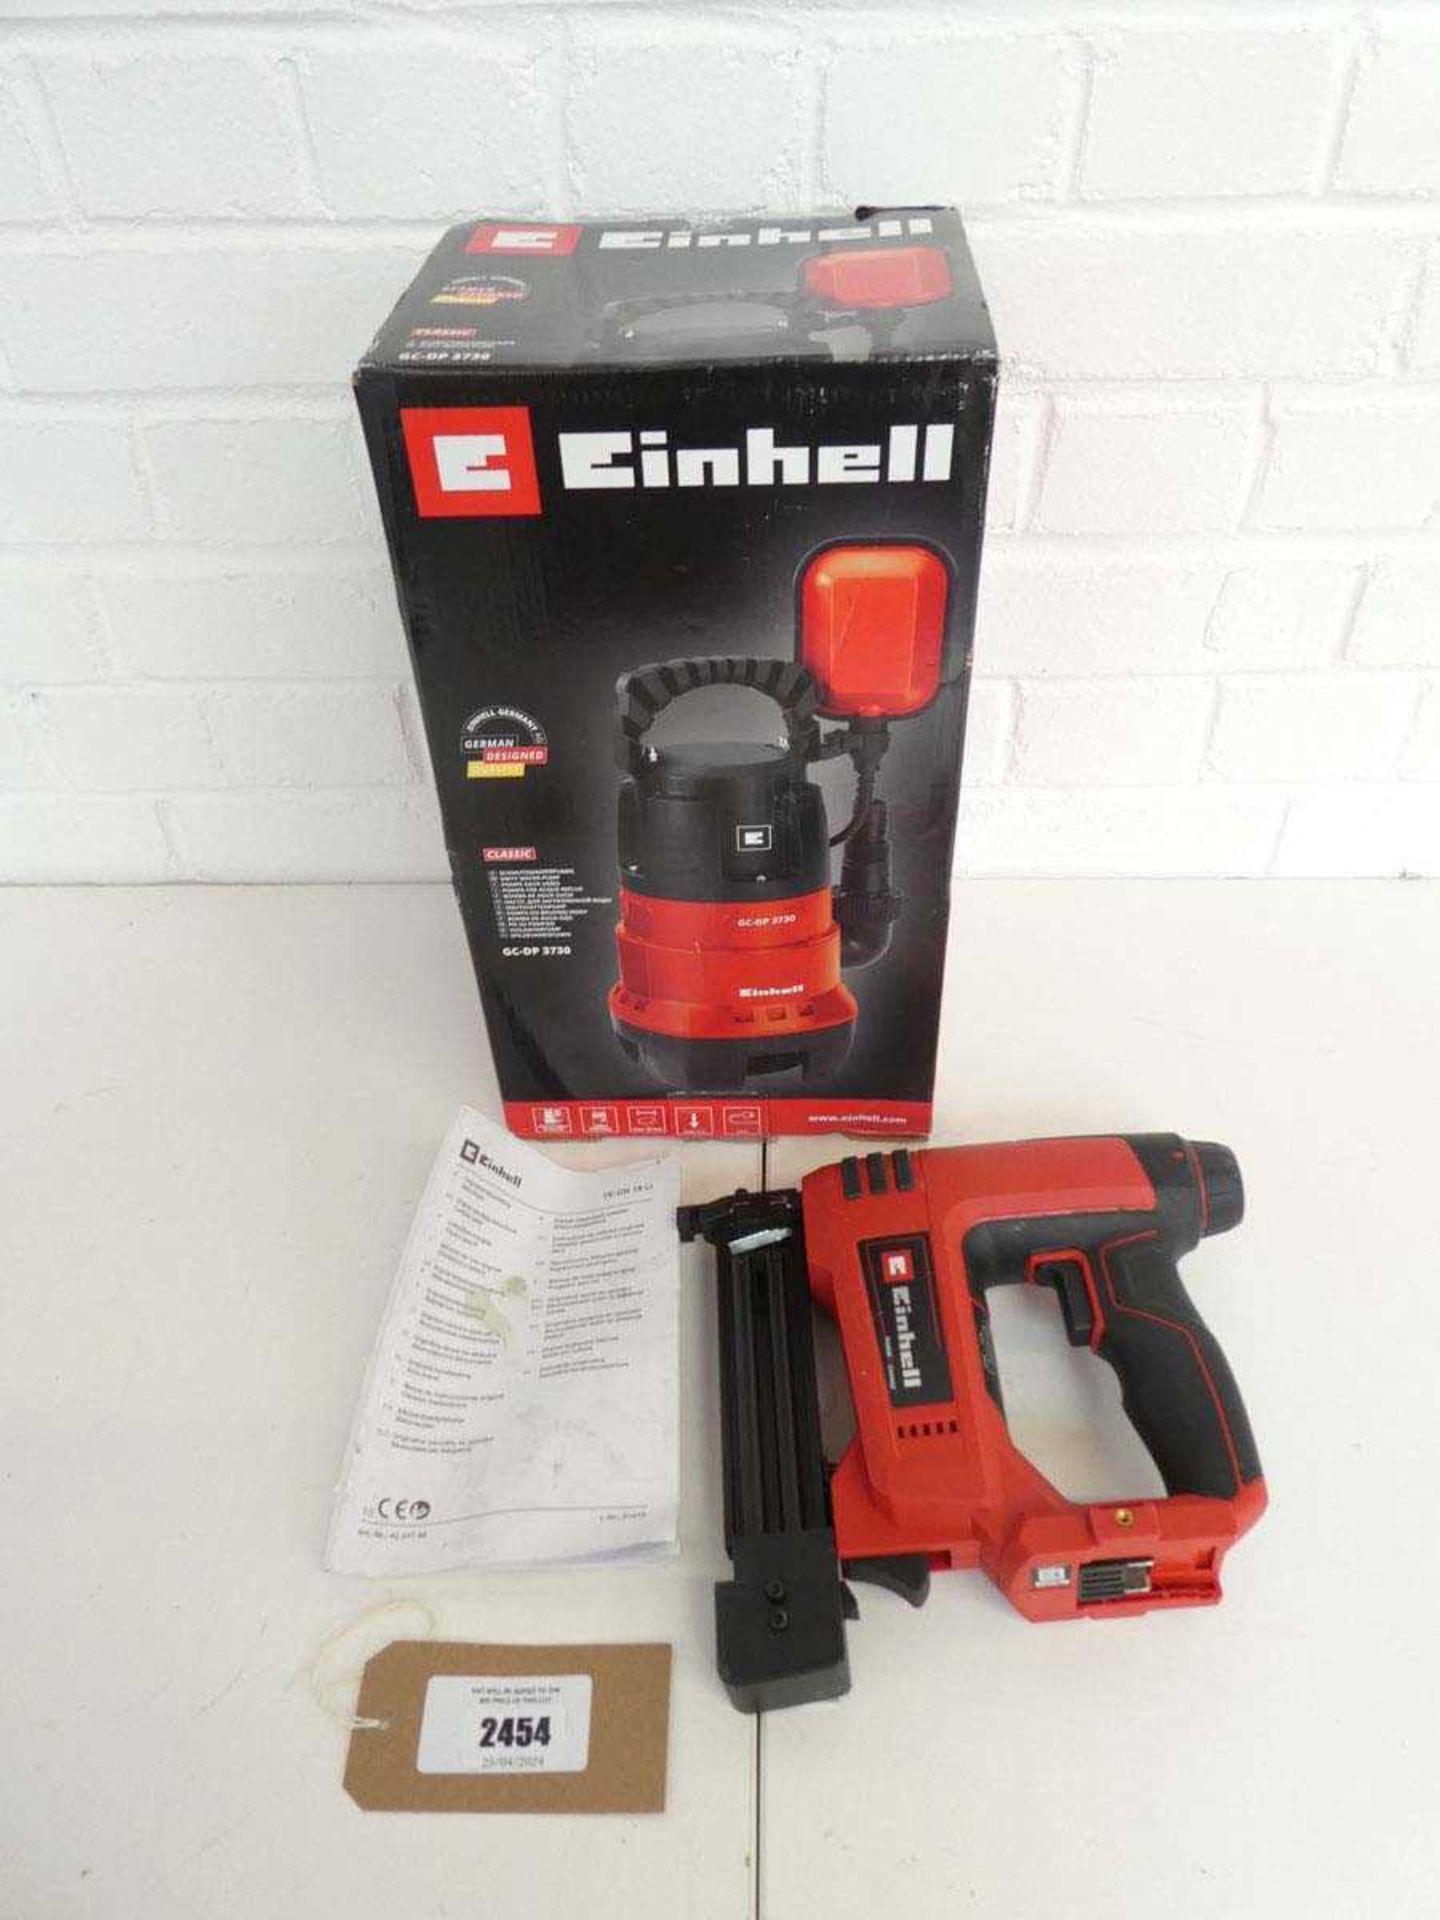 +VAT Boxed Einhell dirty water pump together with an Einhell 18v cordless nailer